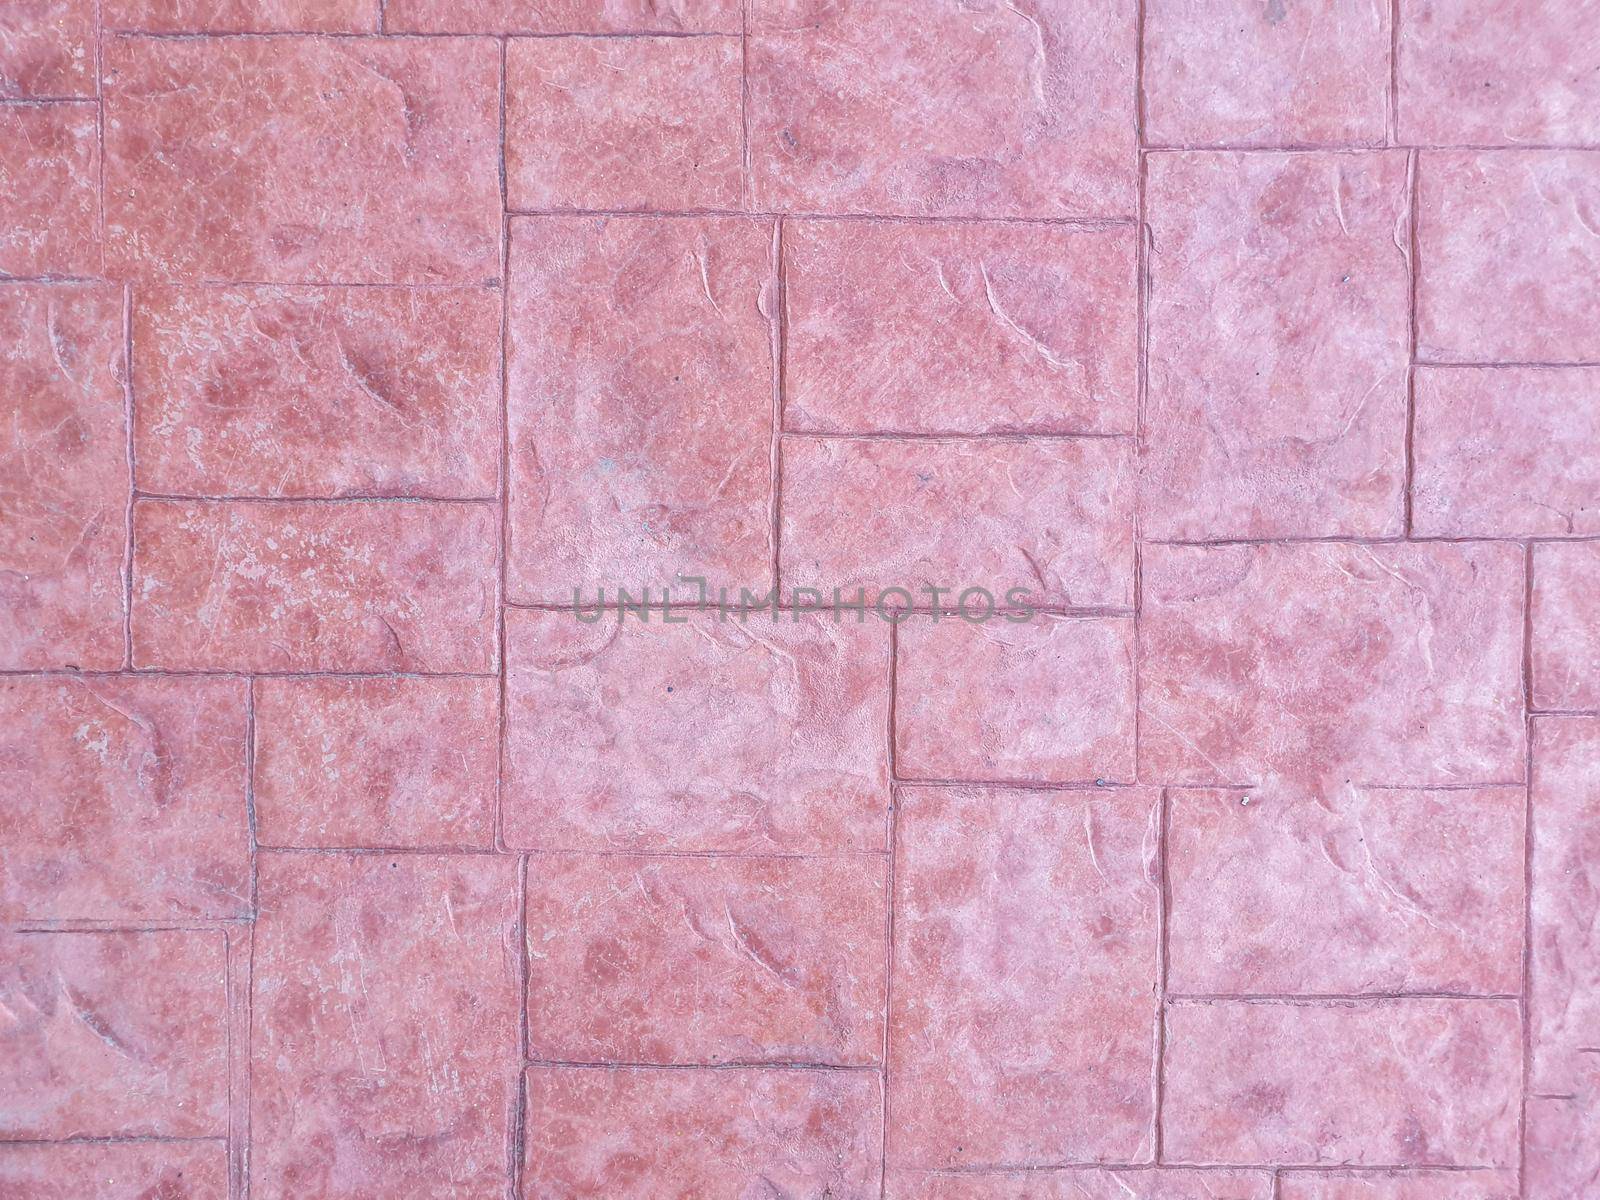 Brick wall or floor texture surface background by NongEngEng